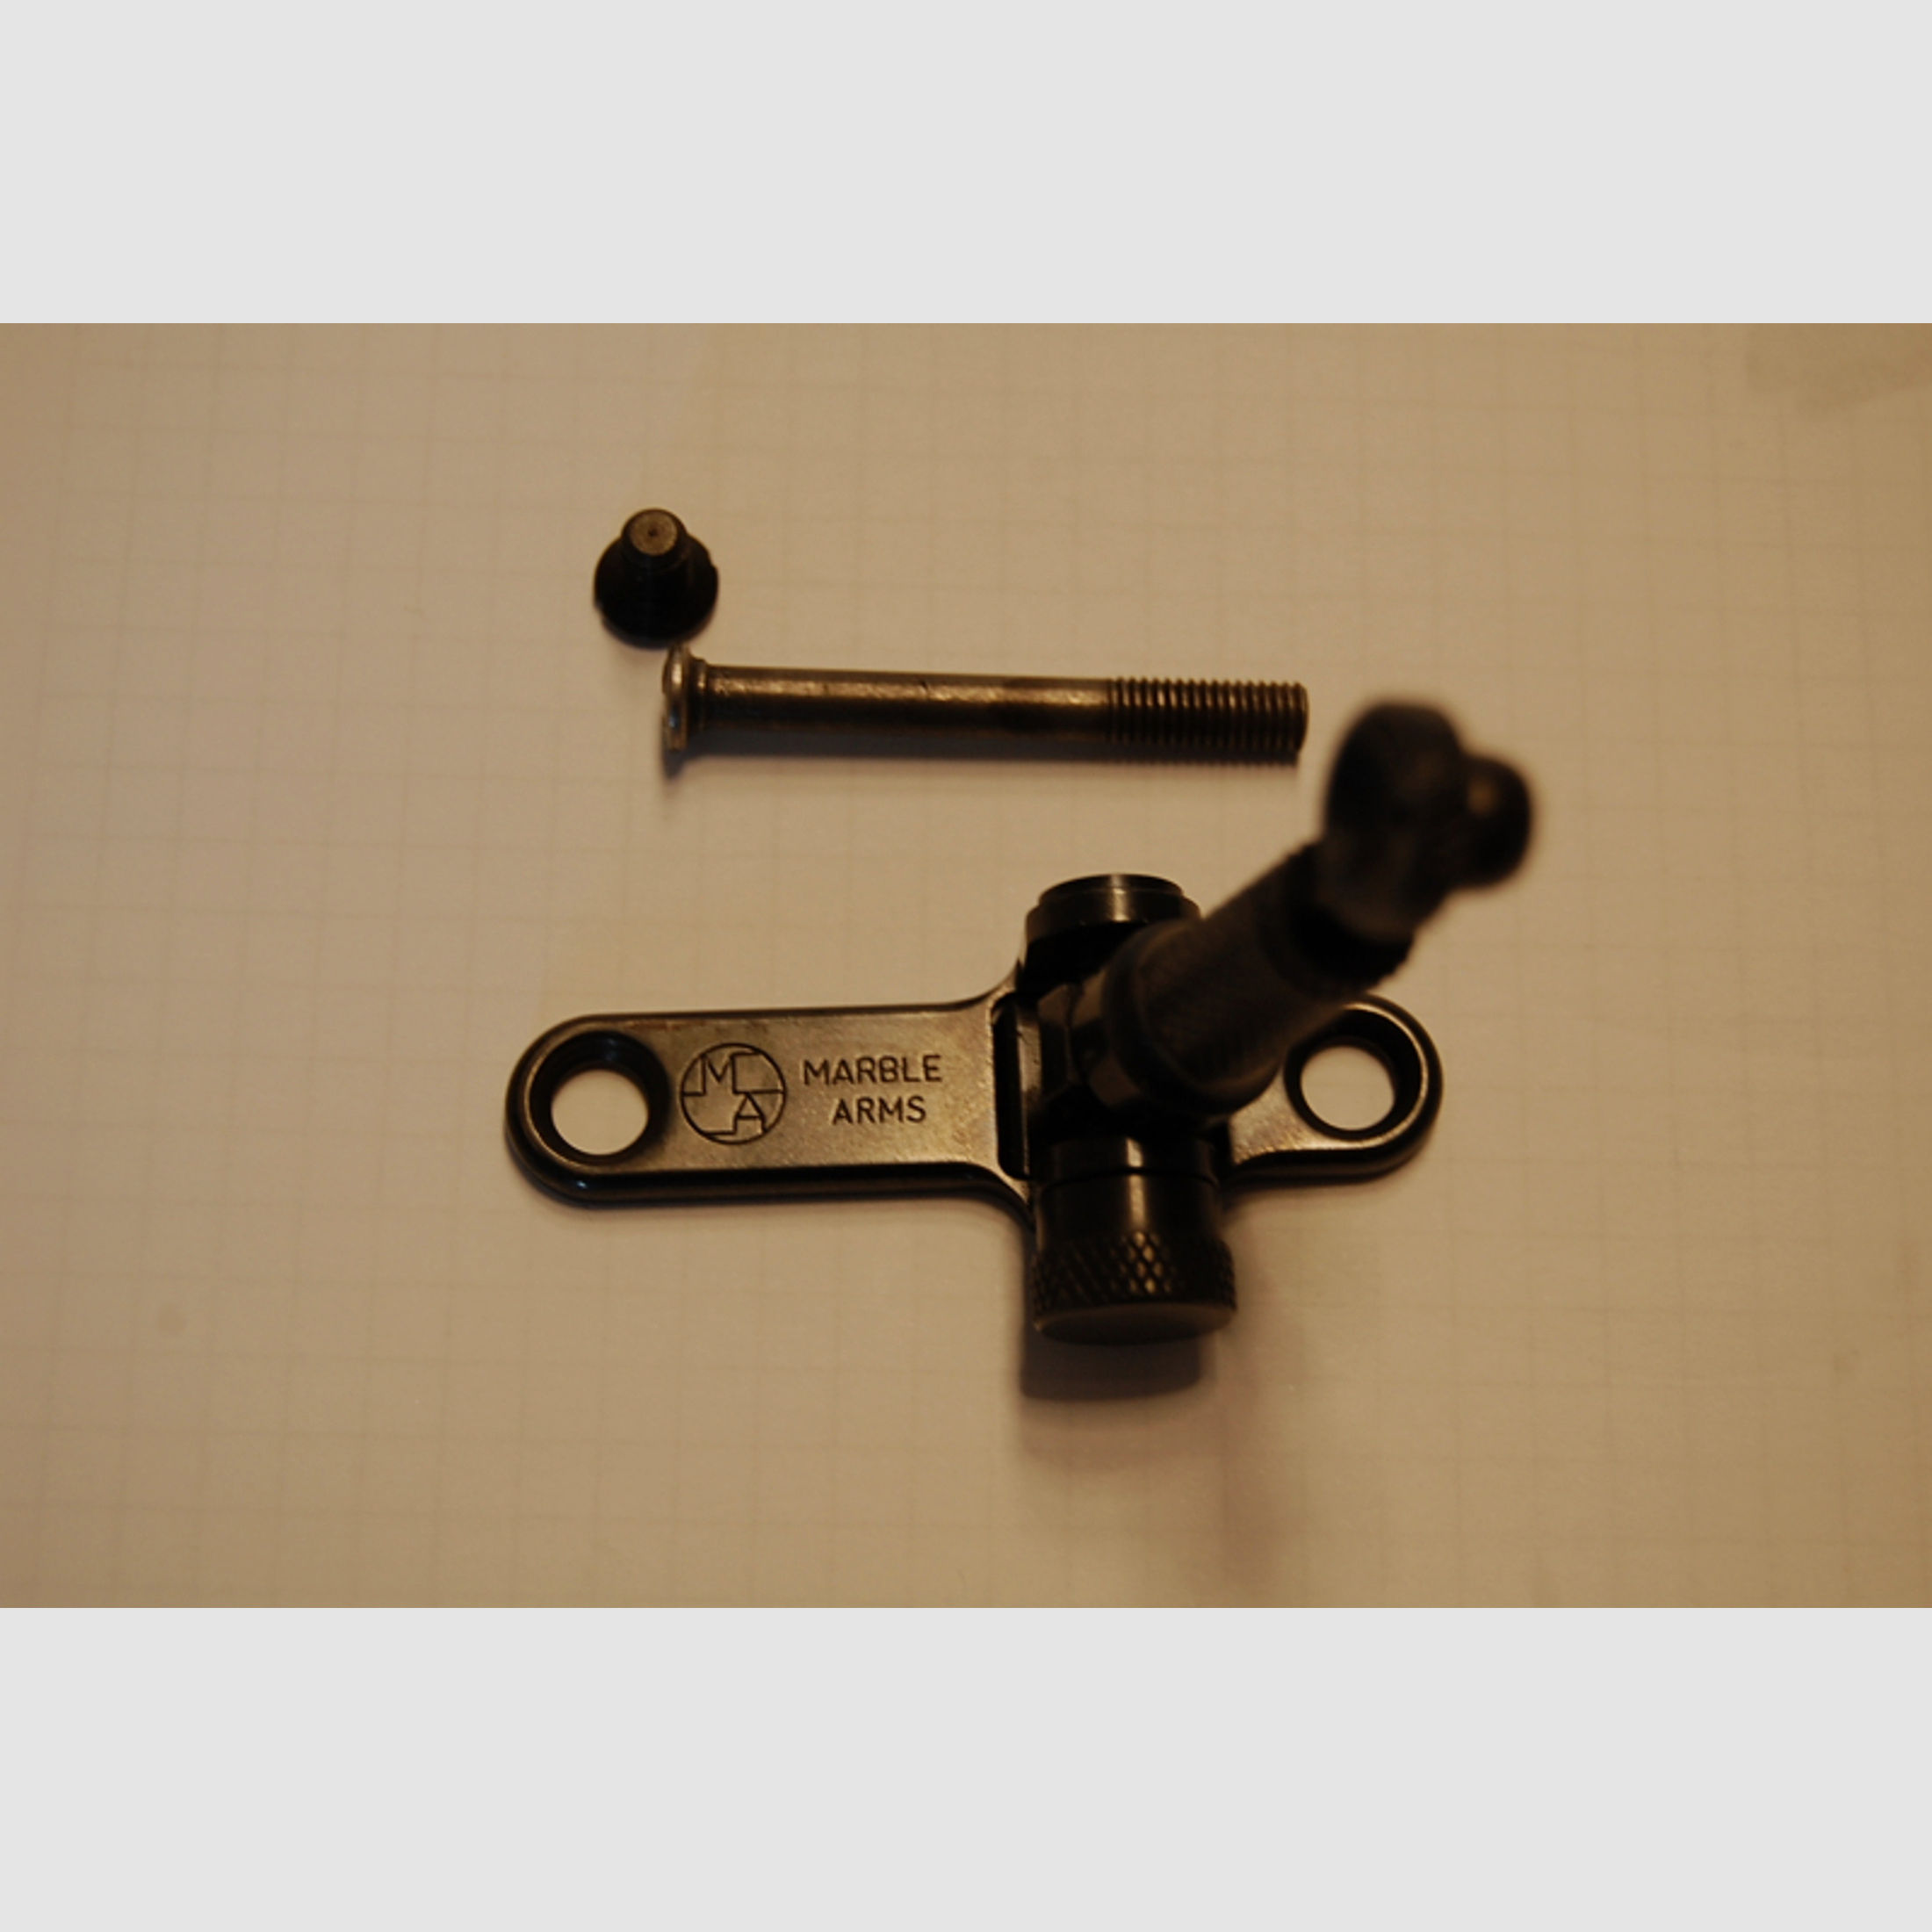 Marble Arms Peep Tang Sight. Diopter